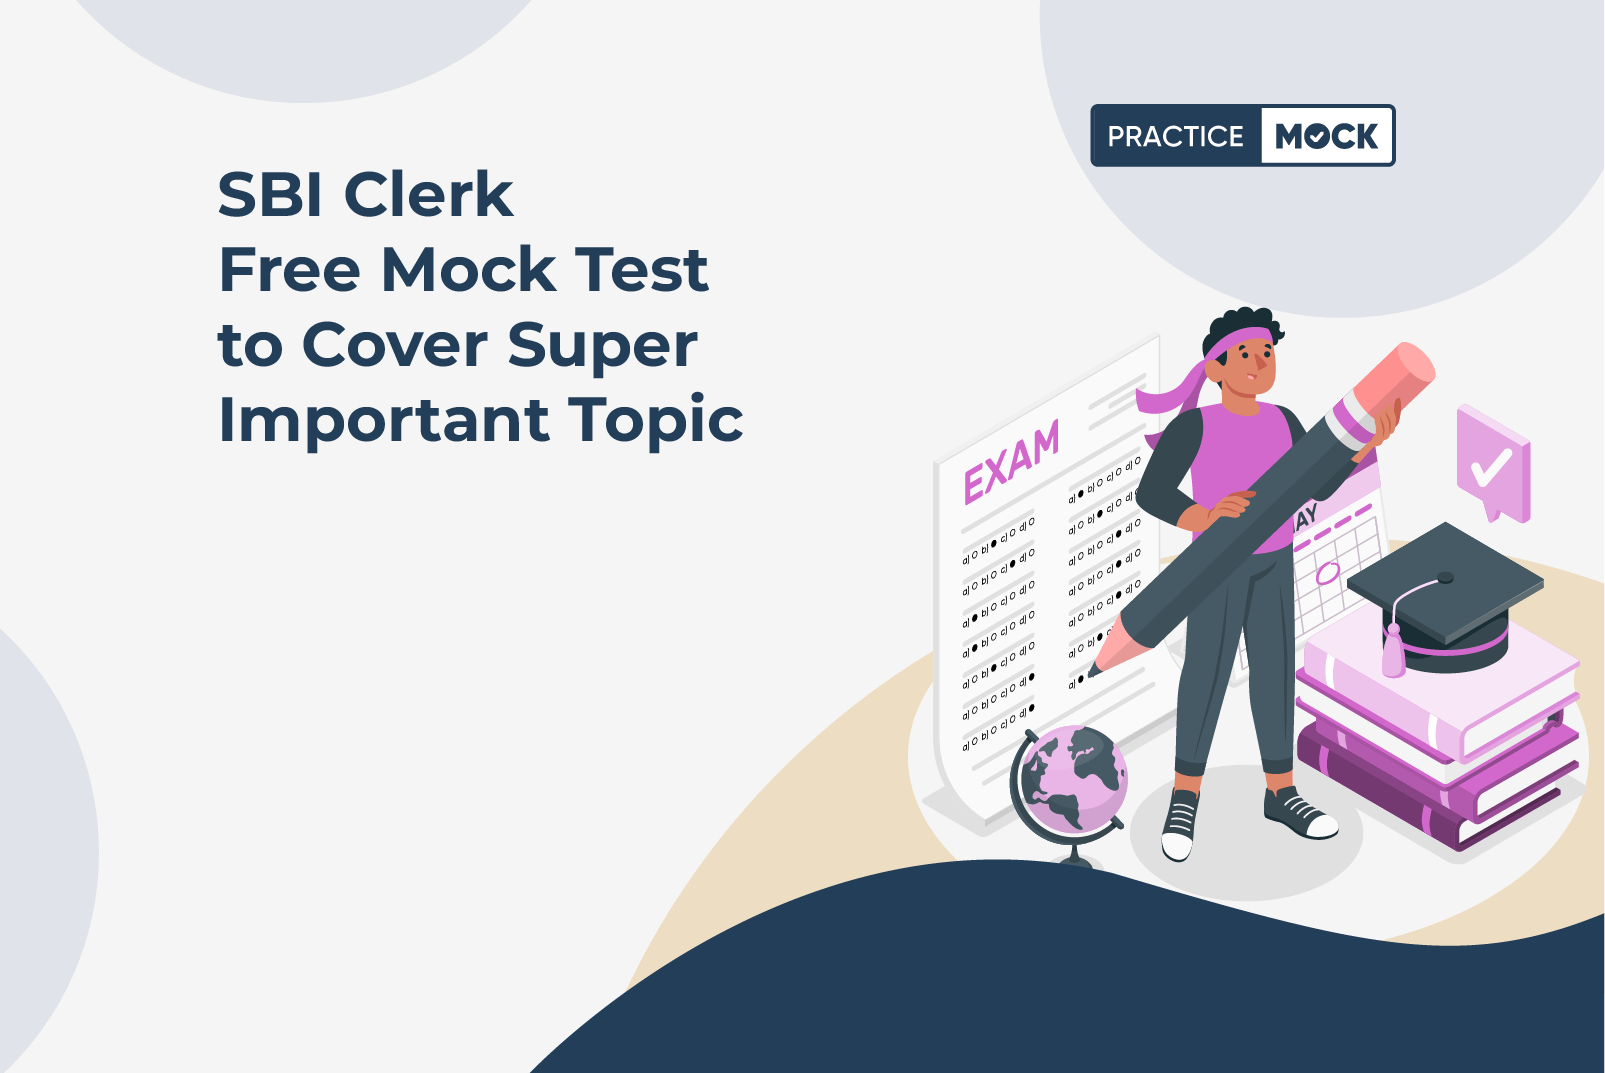 SBI Clerk Free Mock Test to Cover Super Important Topics